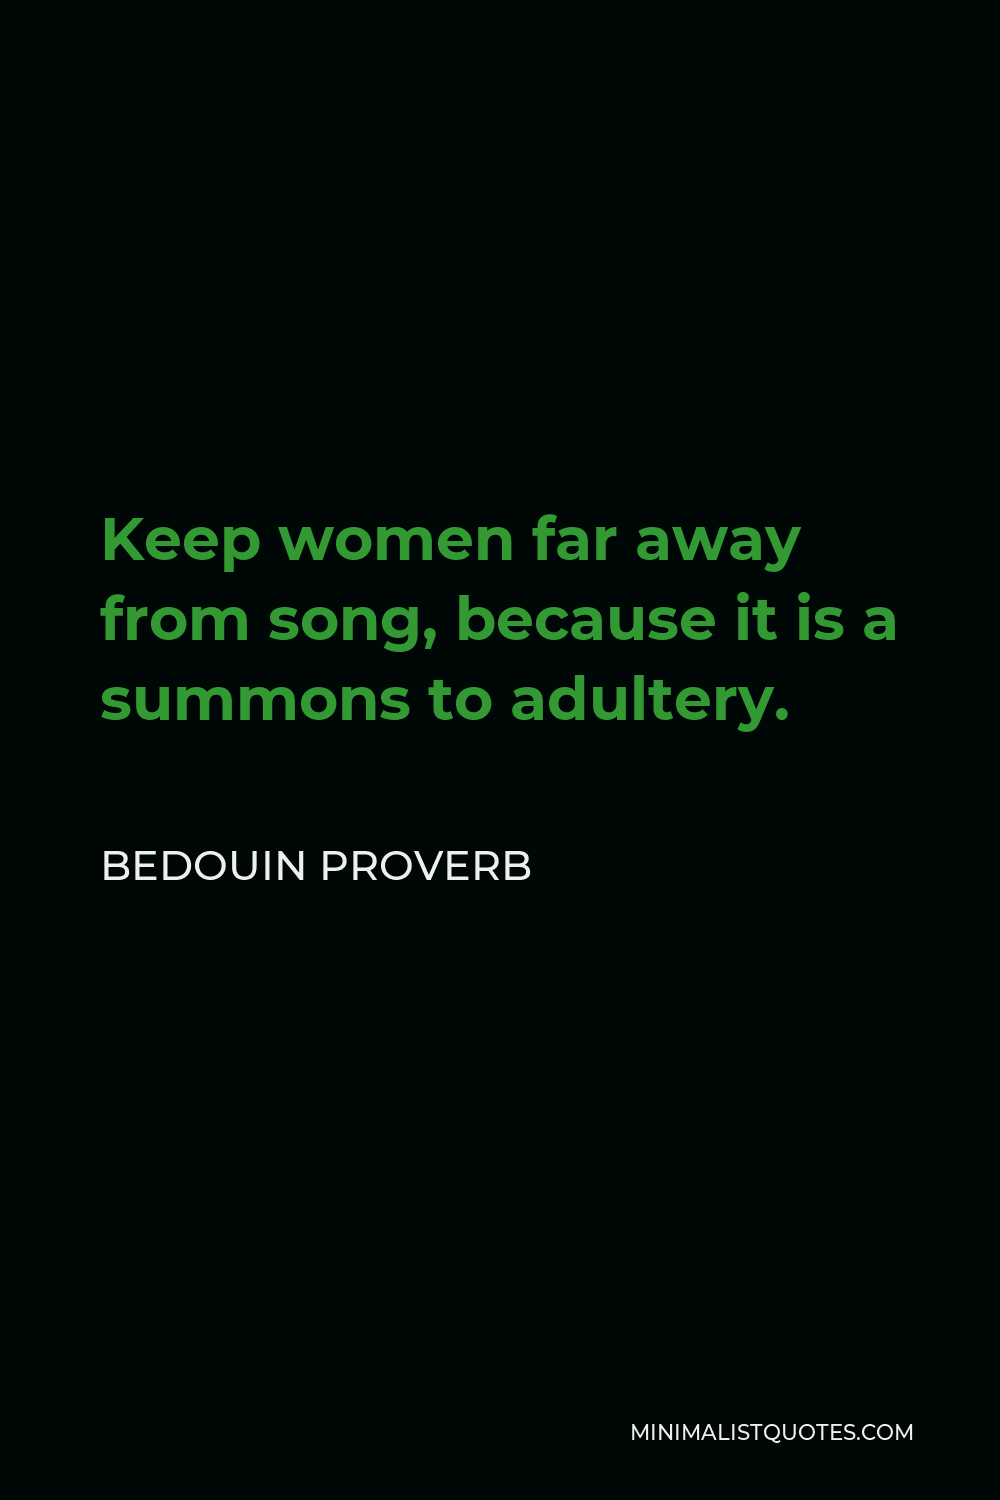 Bedouin Proverb Quote - Keep women far away from song, because it is a summons to adultery.